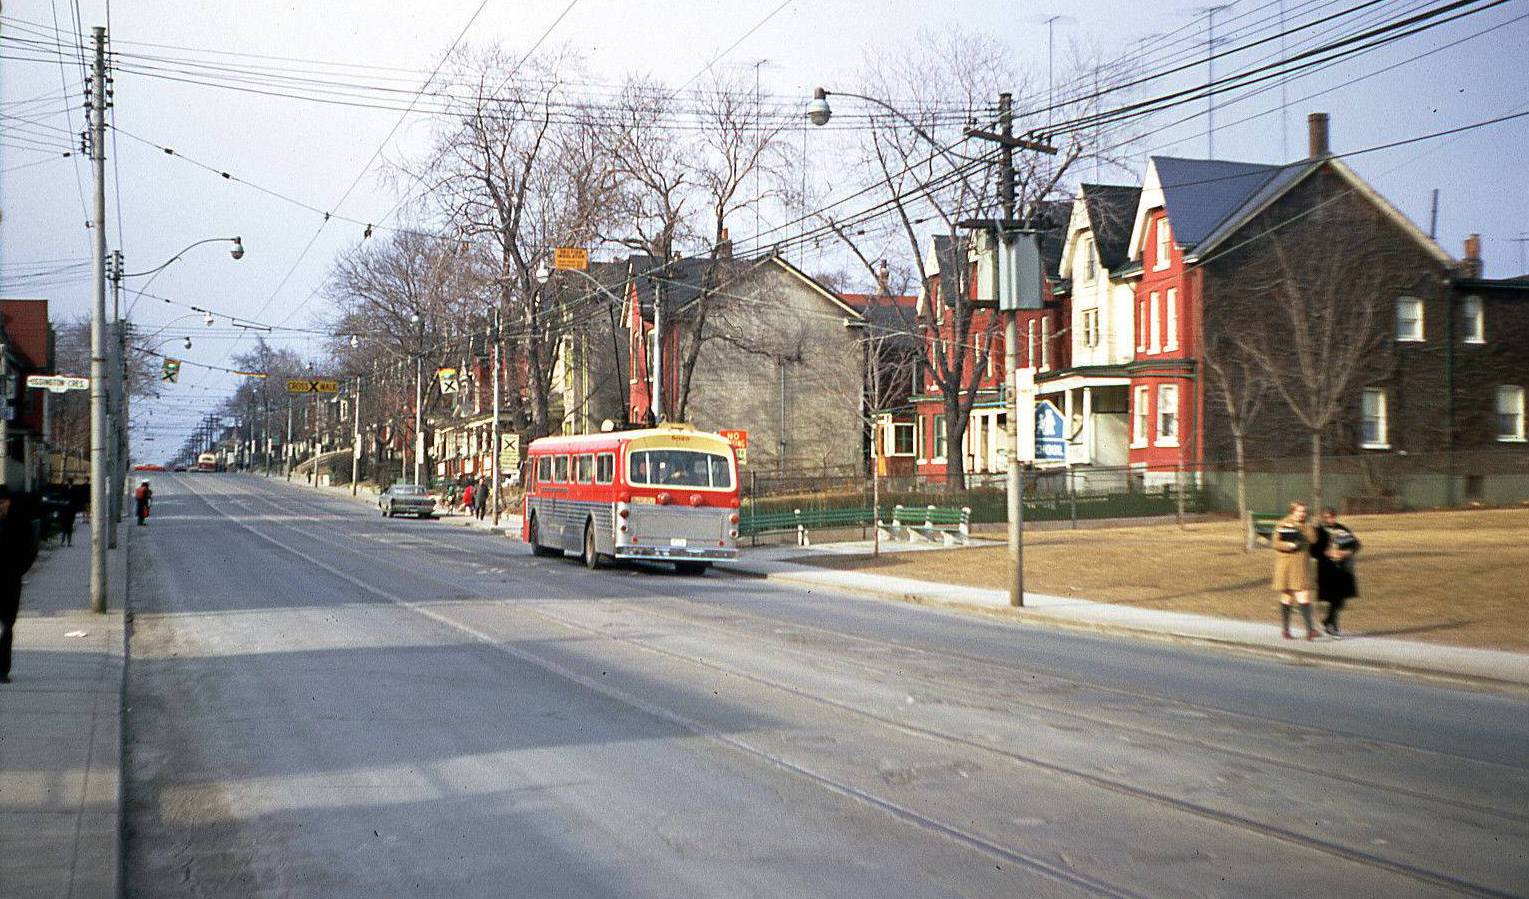 A PHOTO - TORONTO - OSSINGTON AVE NEAR OSSINGTON CRES - TROLLEY BUS PULLED OVER - TWO SCHOOL GIRLS WALKING WITH BOOKS - HOUSESES - 1969